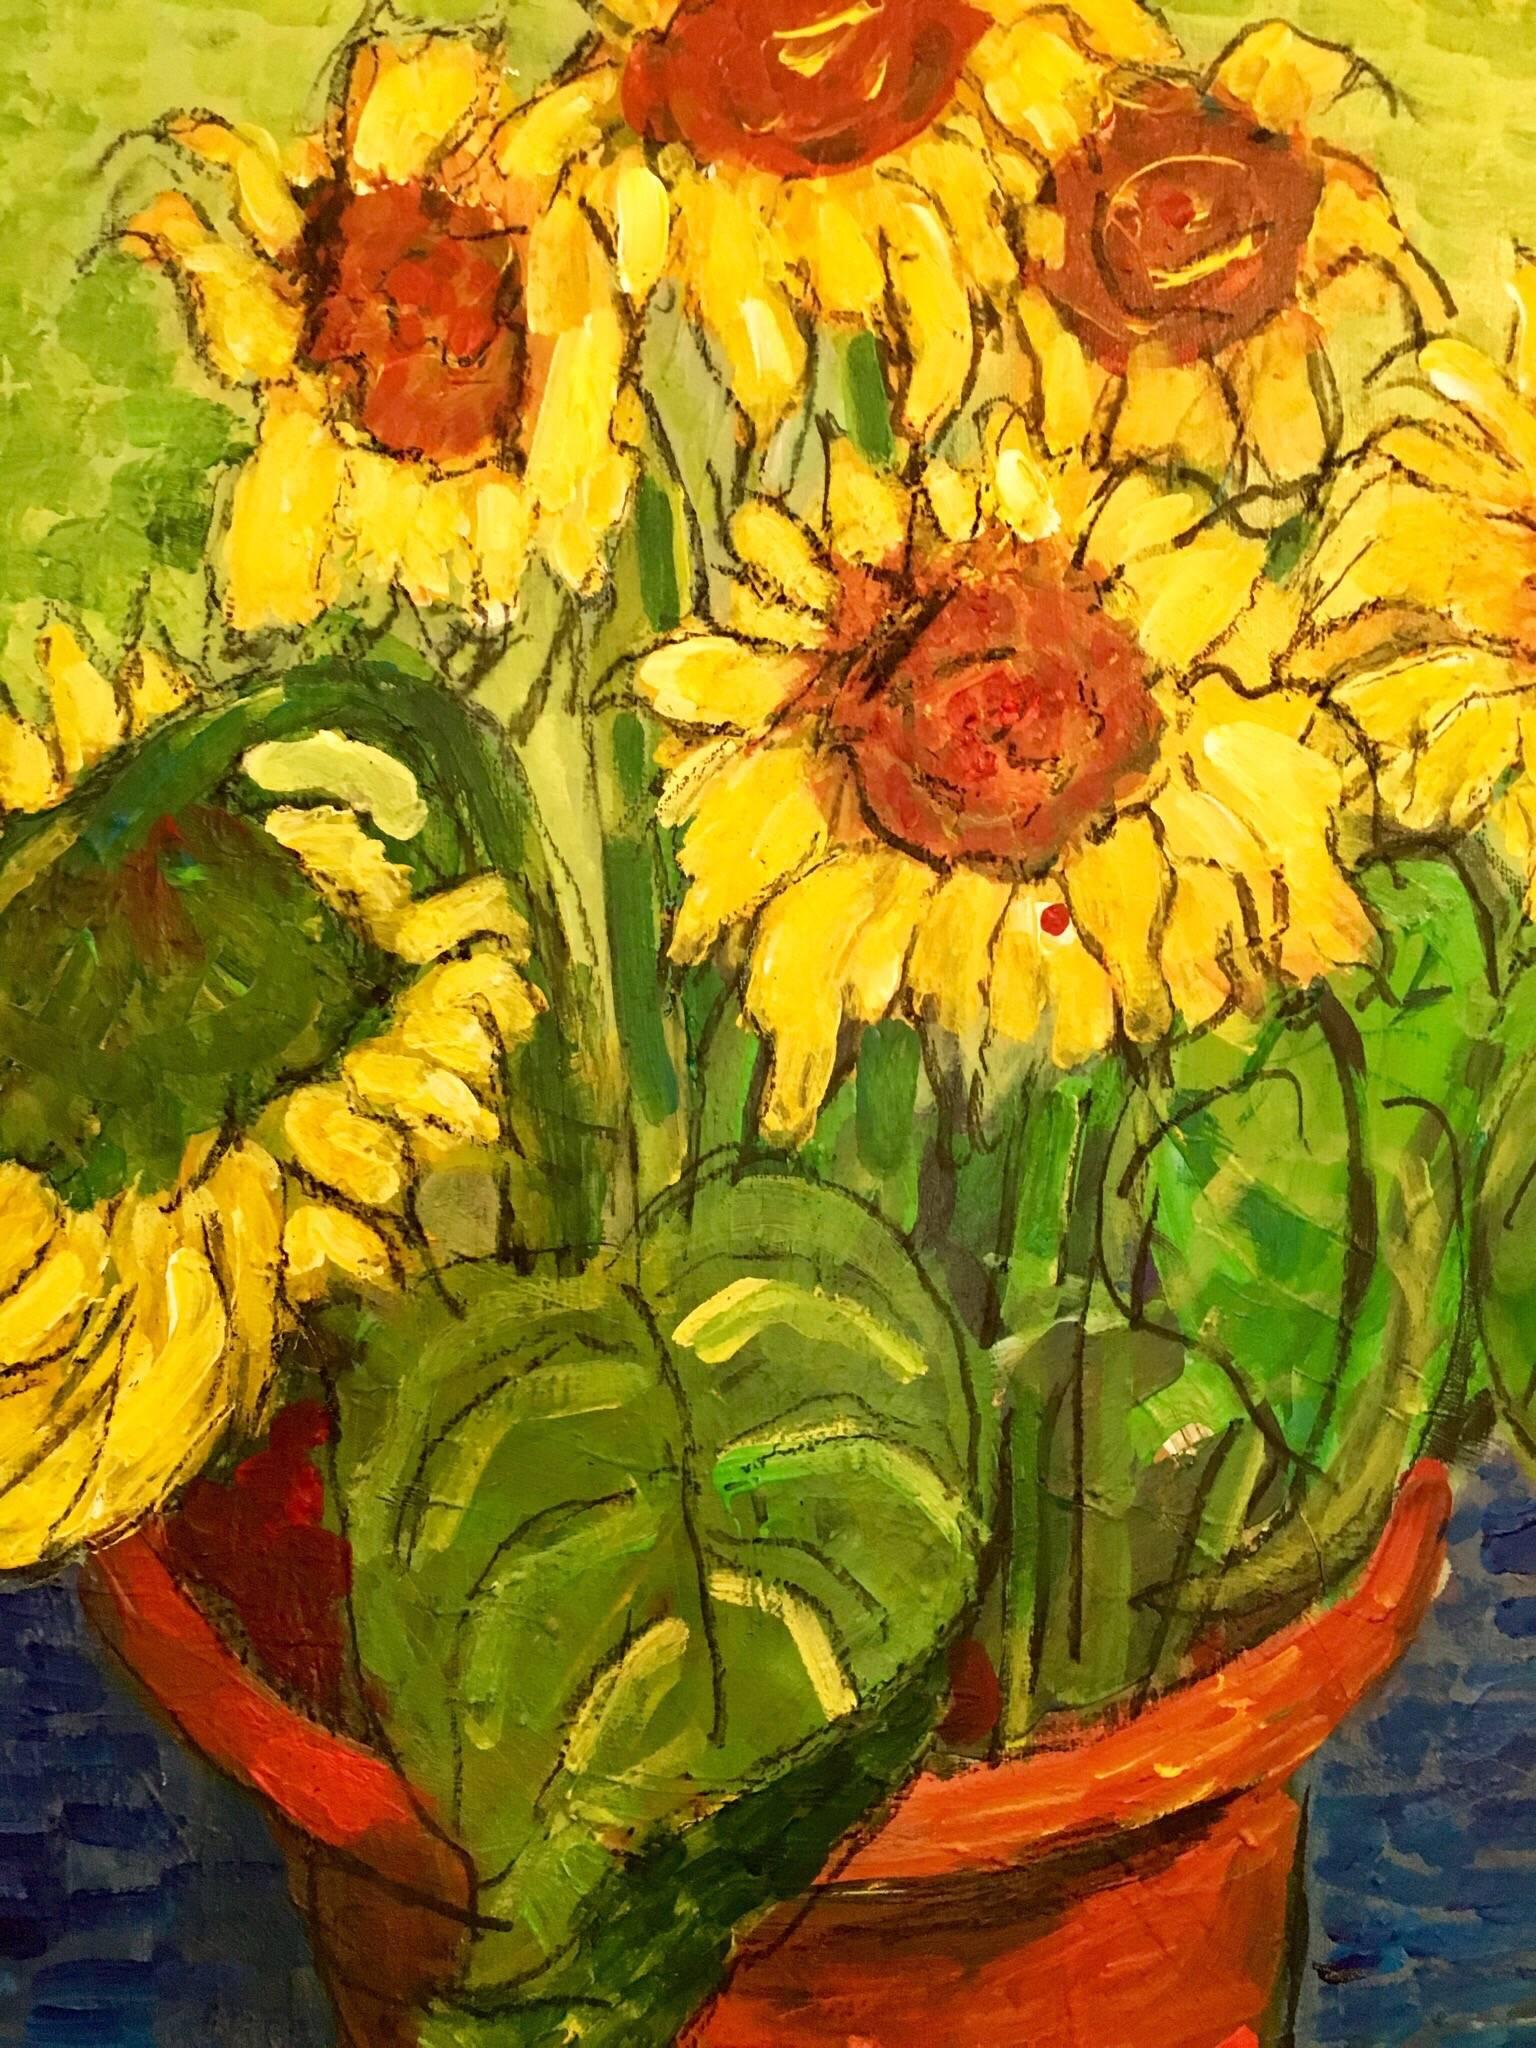 Sunflowers Growing in a Pot
by Pamela Cawley, British 20th century
oil painting on canvas, unframed

canvas: 23.5 x 19.75 inches 

Stunning original Impressionist oil painting by the 20th century British artist, Pamela Cawley. The work has excellent